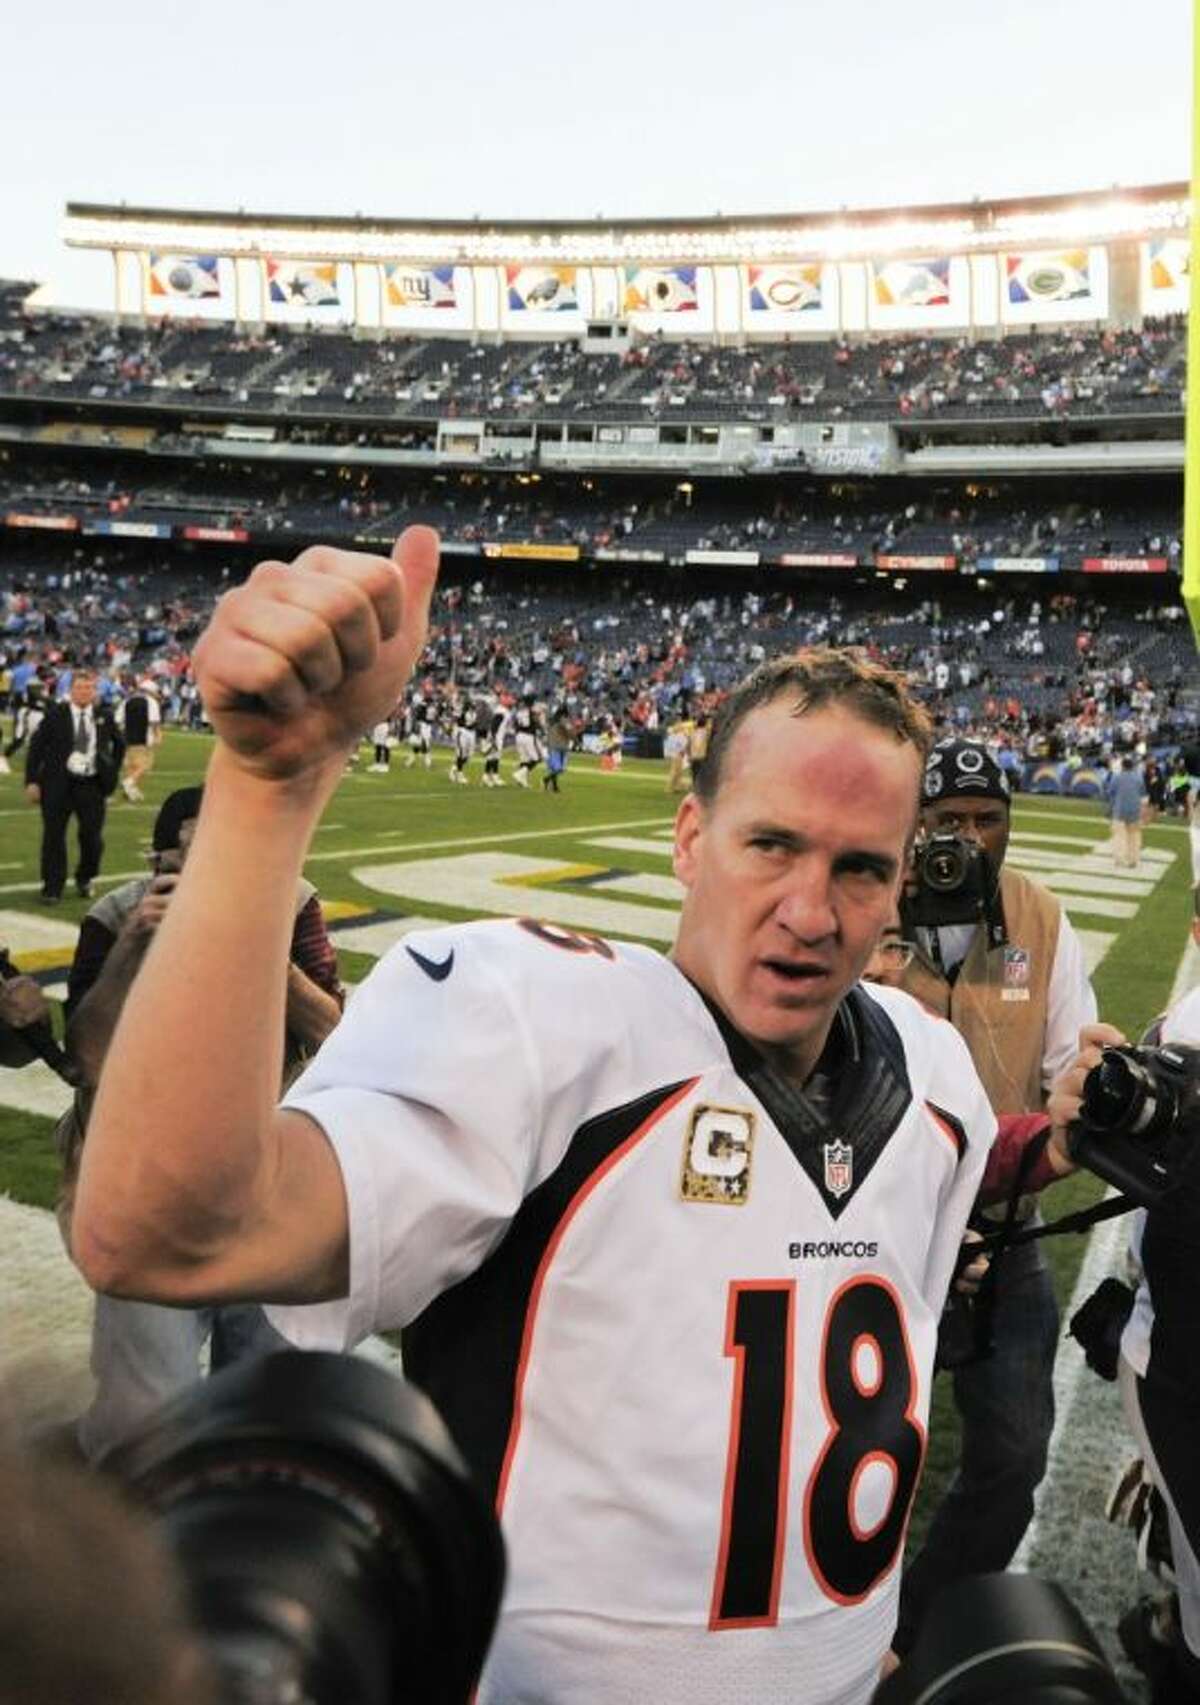 Denver Broncos quarterback Peyton Manning (18) pumps his fist after an NFL football game against the San Diego Chargers Sunday in San Diego. The Broncos won 28-20.